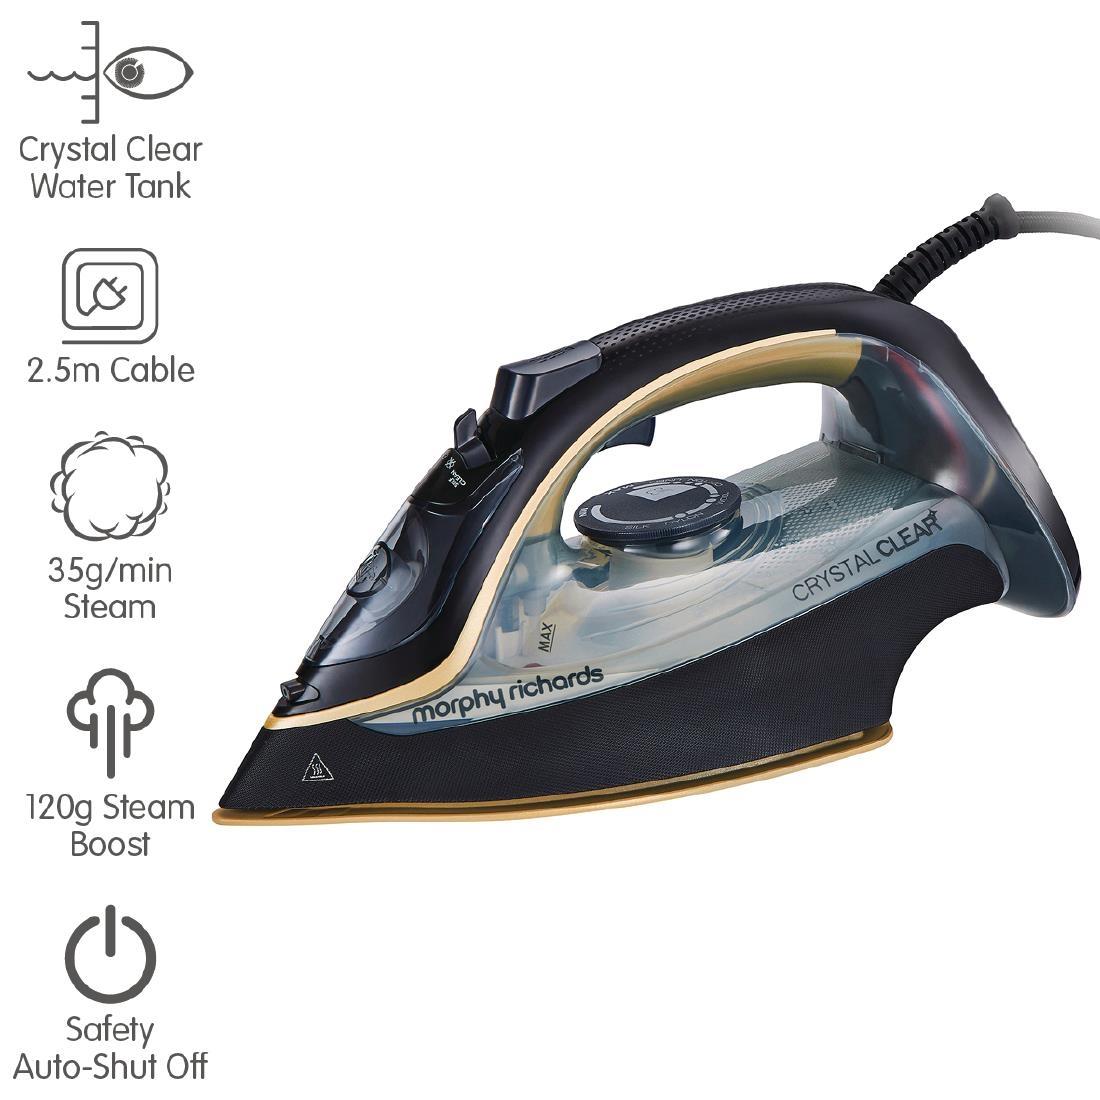 Morphy Richards Crystal Clear Steam Iron 300302 - FP912  - 8